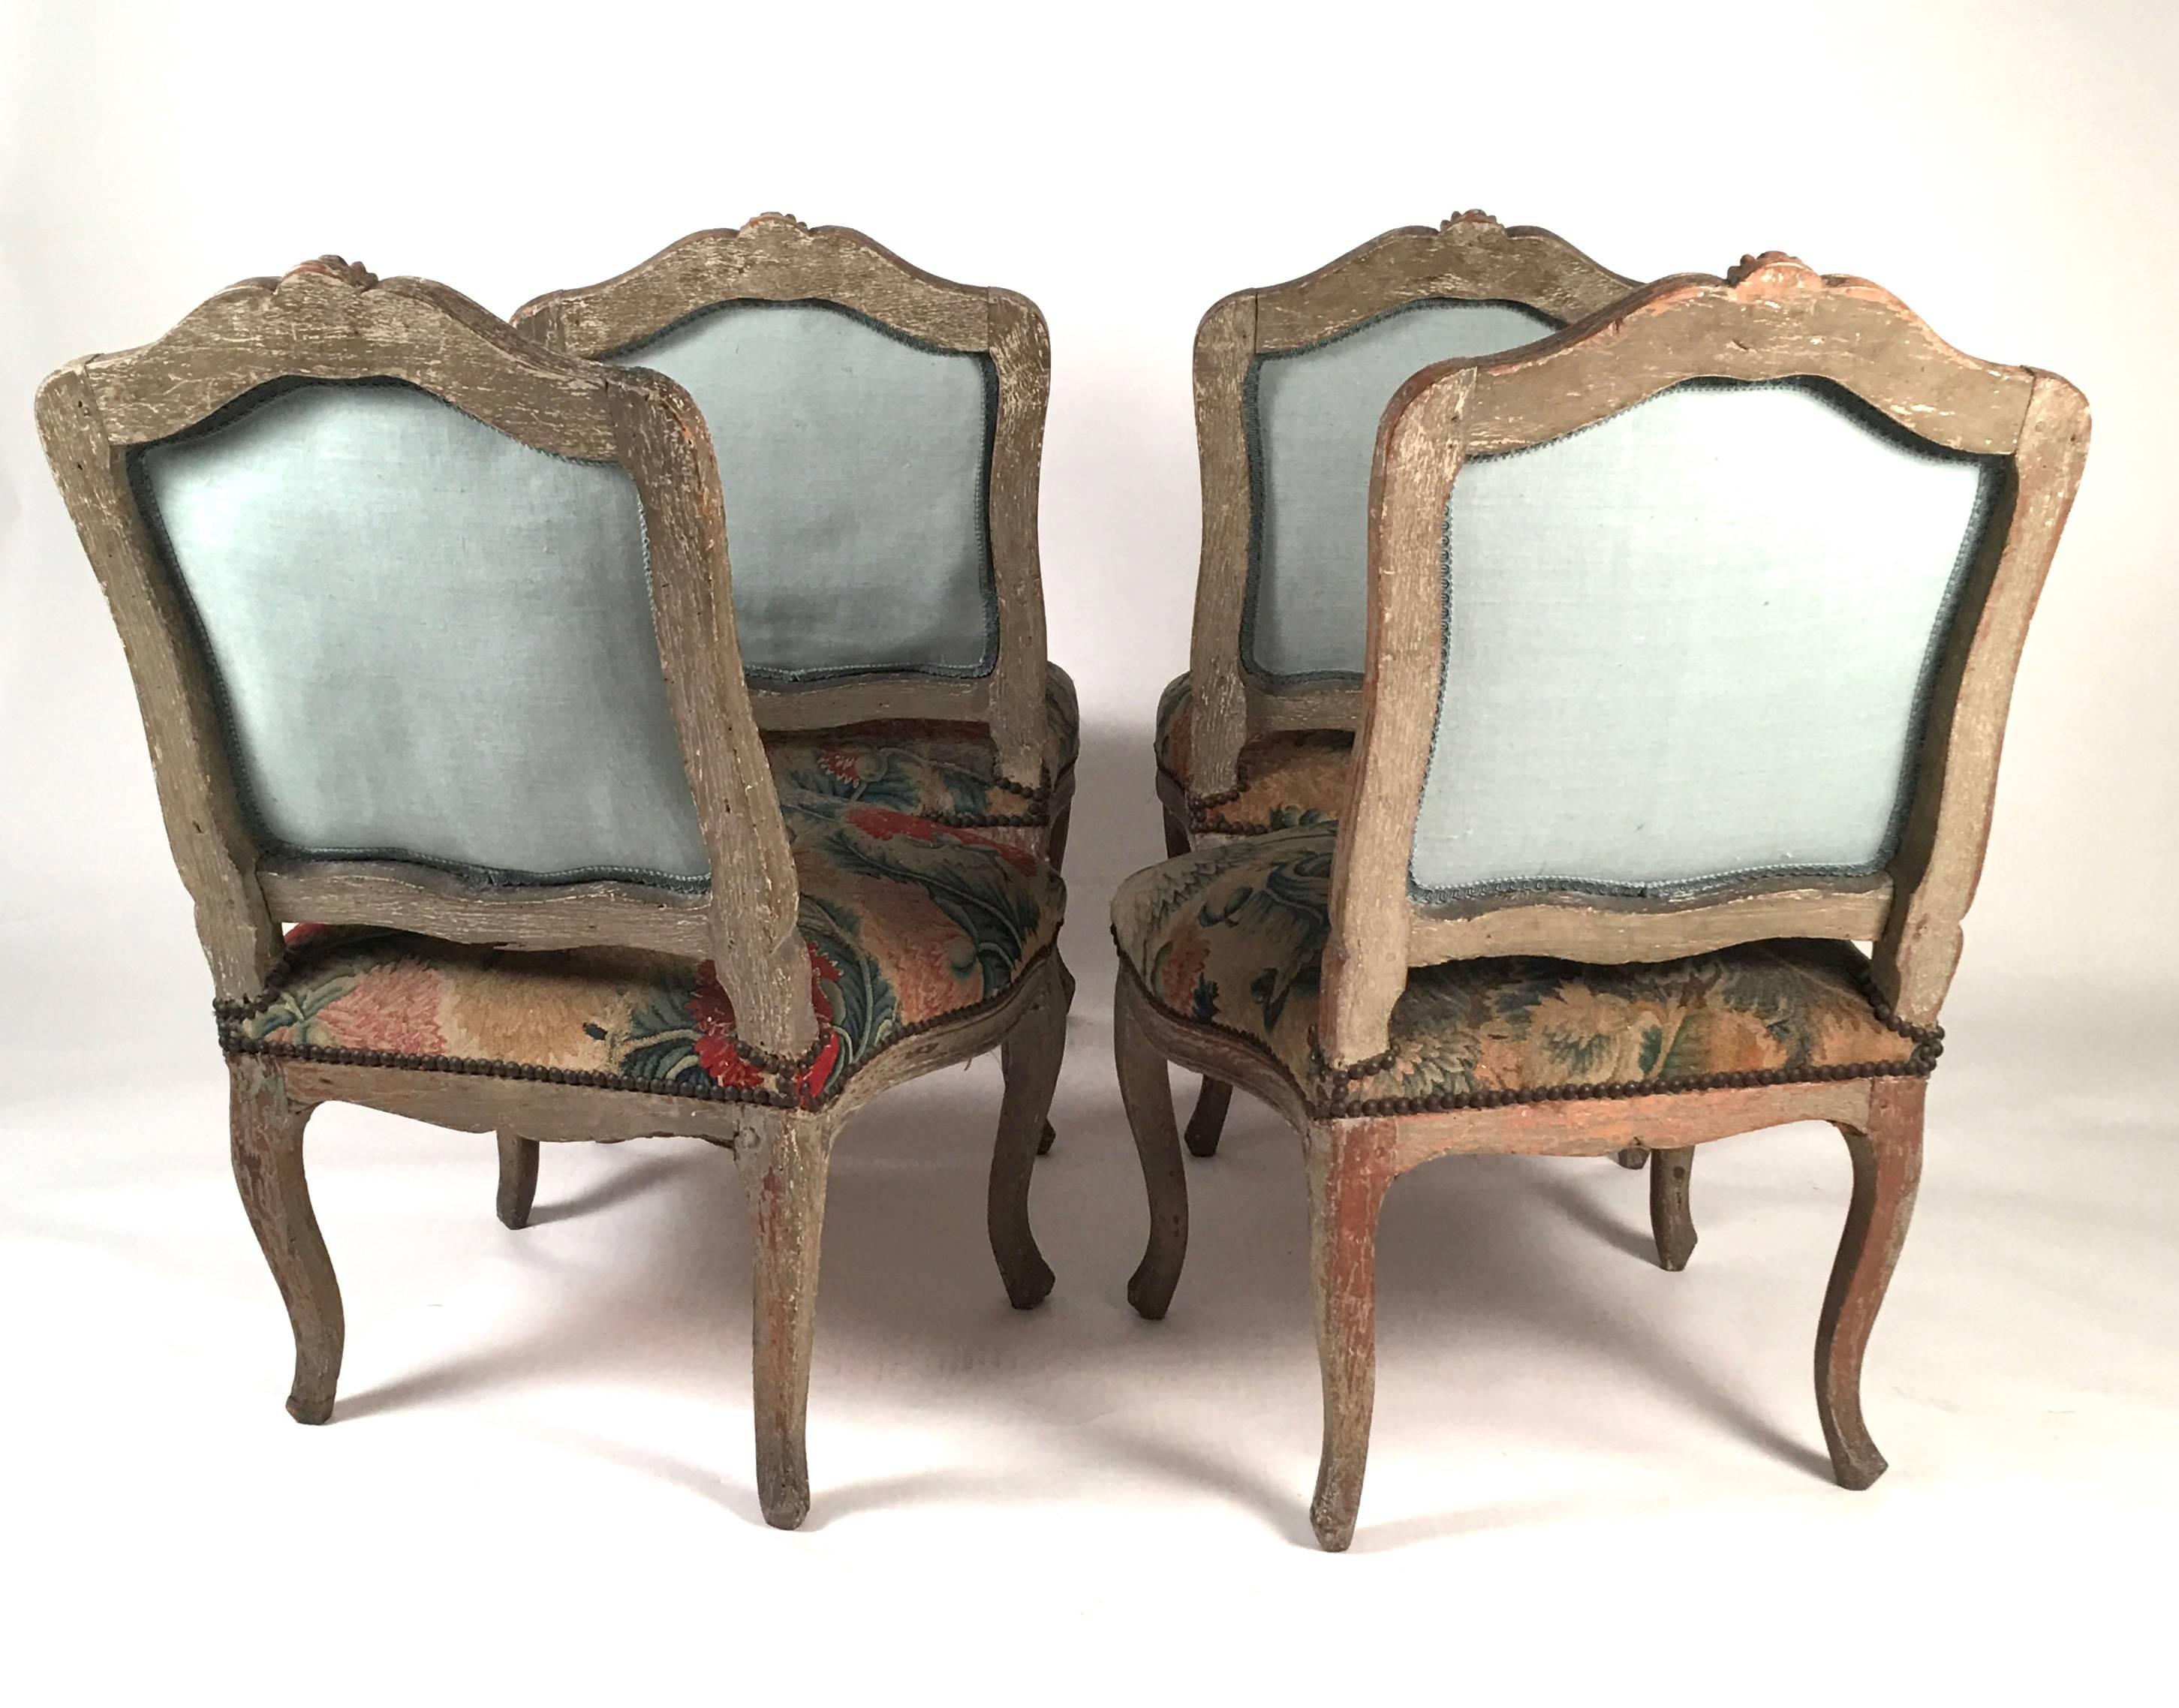 A set of 4 18th century  French Louis XV chairs, upholstered with period floral needlework, with grey painted frames, the arched backs and serpentine seat rails with carved floral decoration, on cabriole legs.  The floral needlework is wonderfully